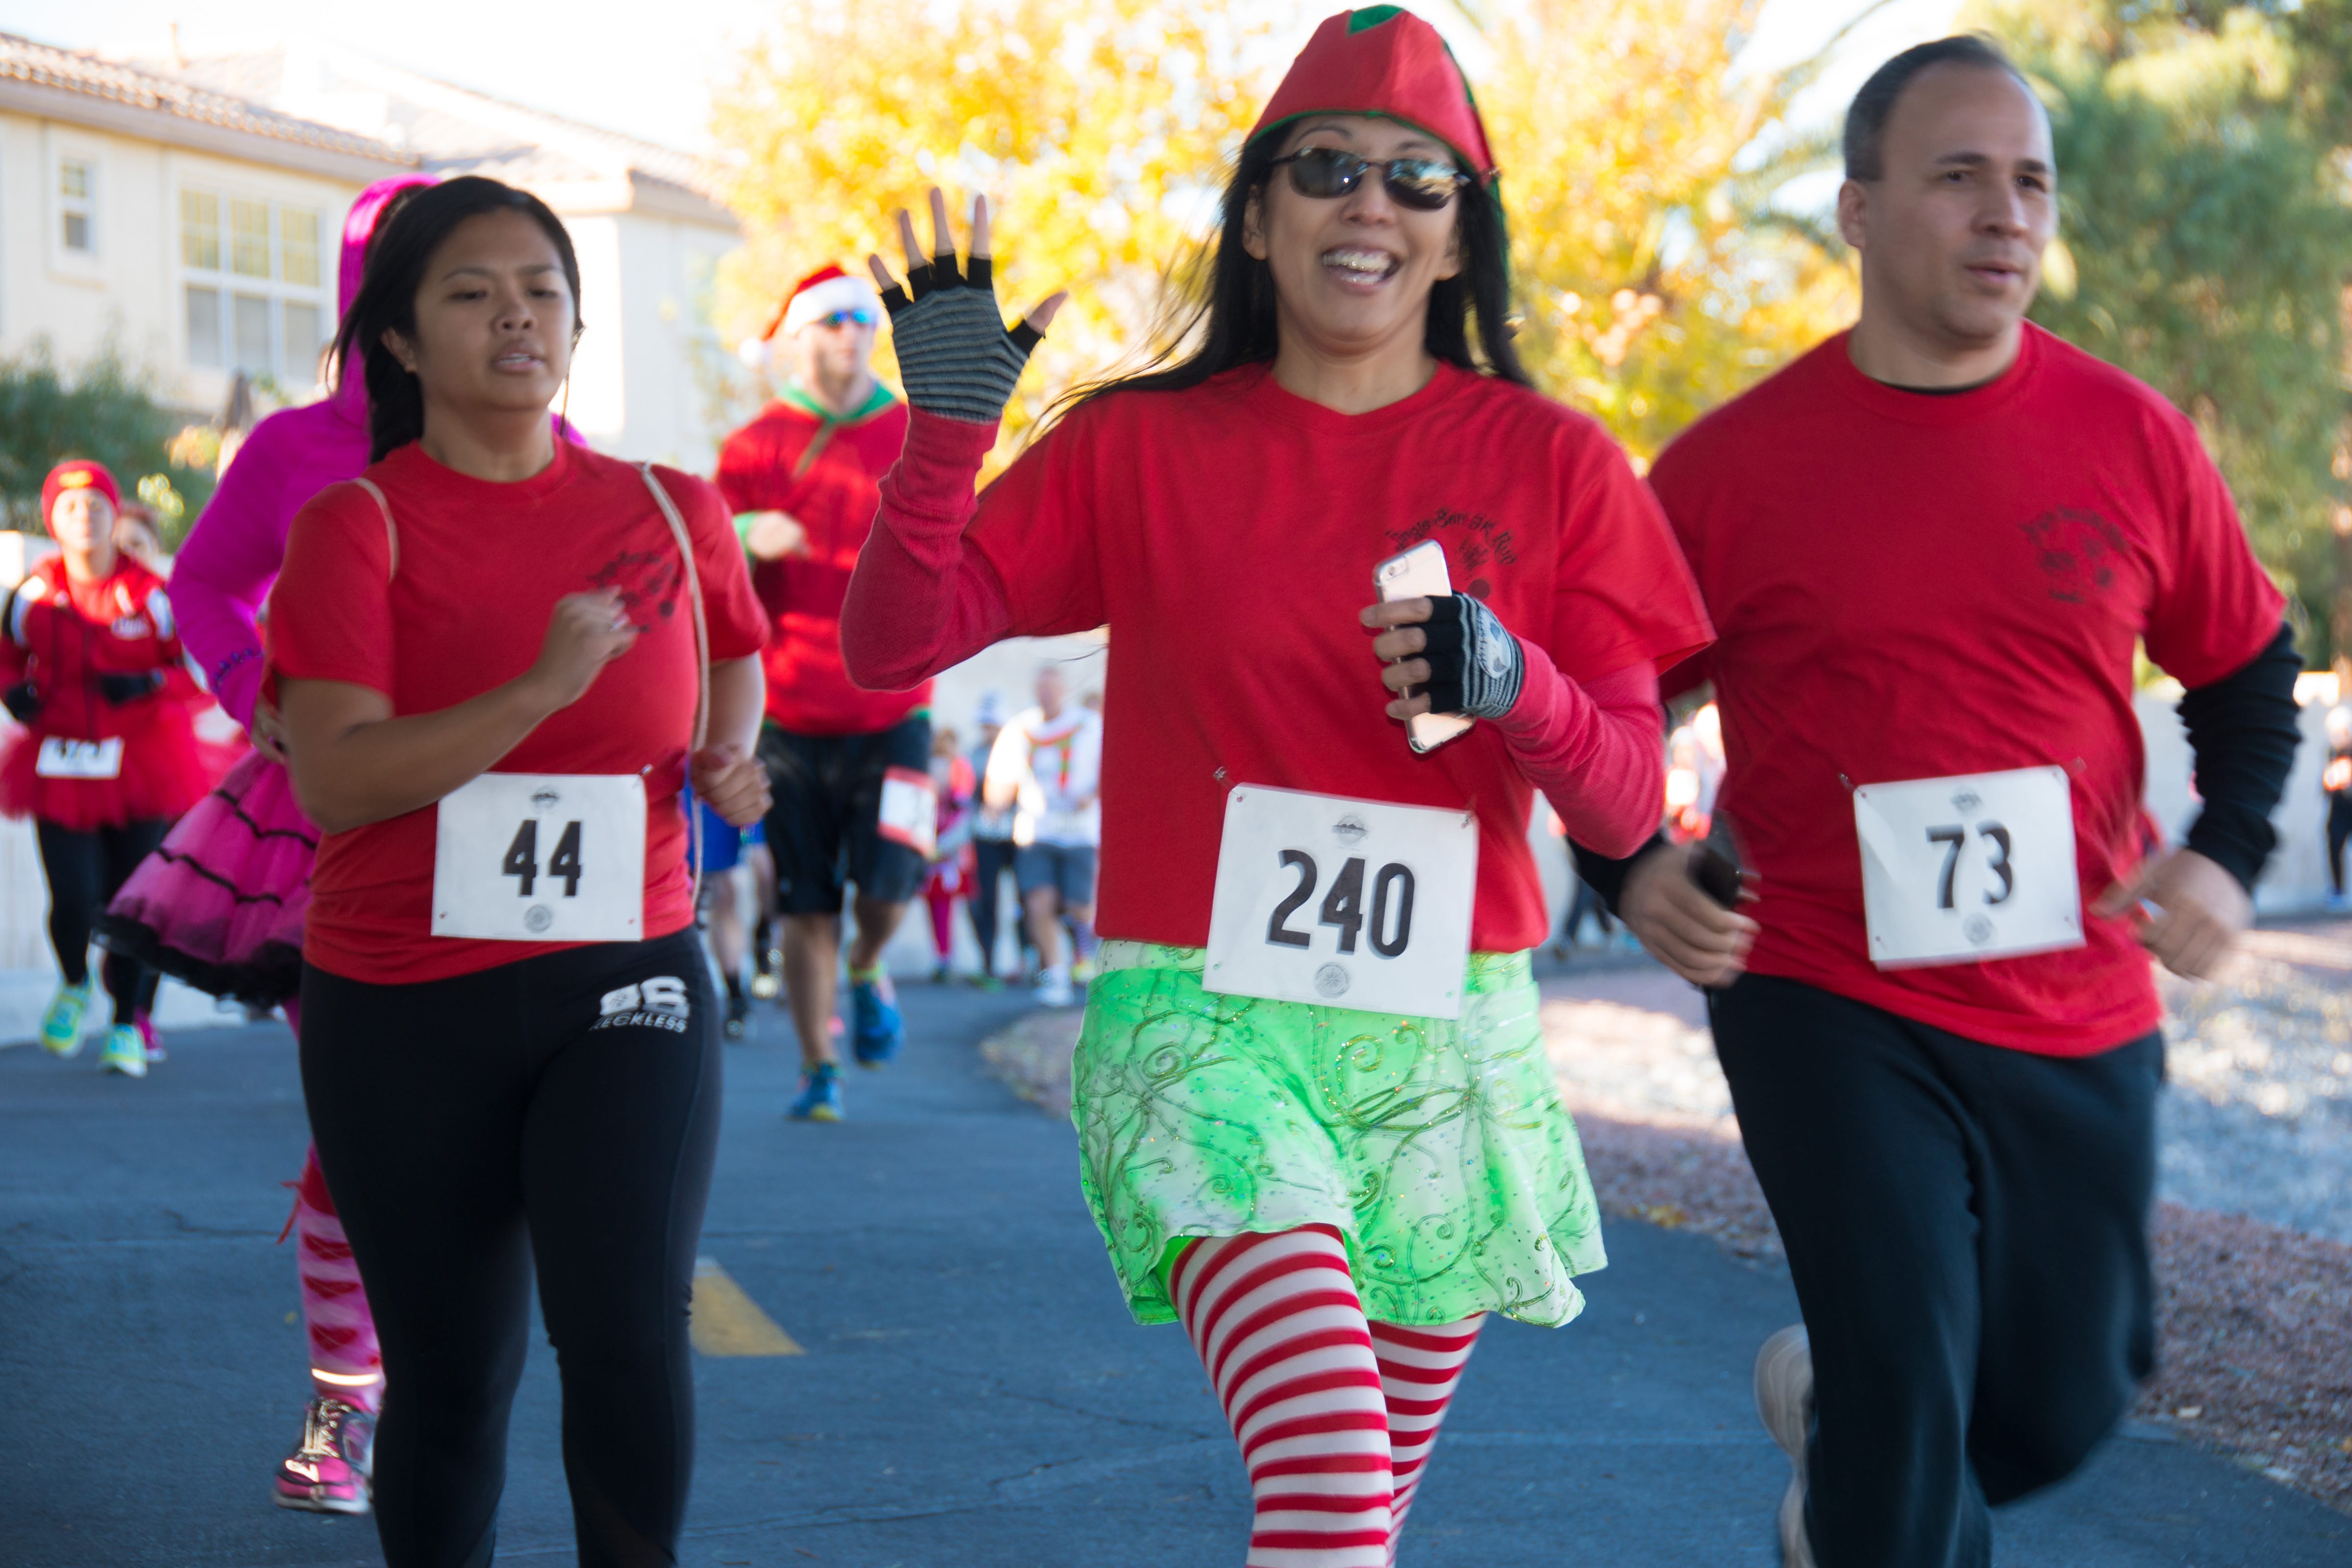 Runners dressed in festive costumes during the Riendeer Dash 5K